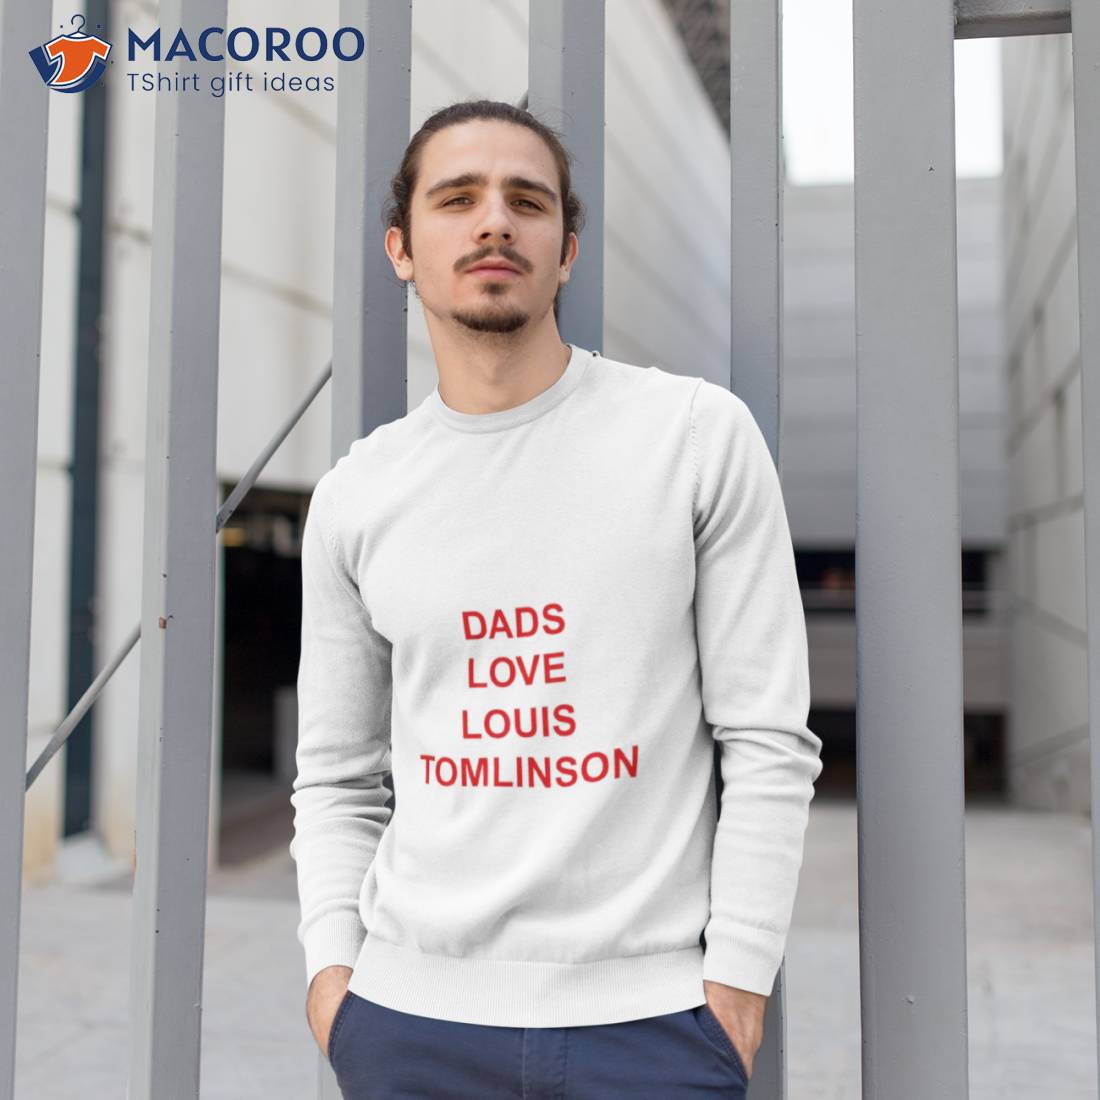 Louis Tomlinson Loves Dads Who Love Louis Tomlinson Long Sleeve T Shirt -  Long Sleeve T Shirt, Sweatshirt, Hoodie, T Shirt